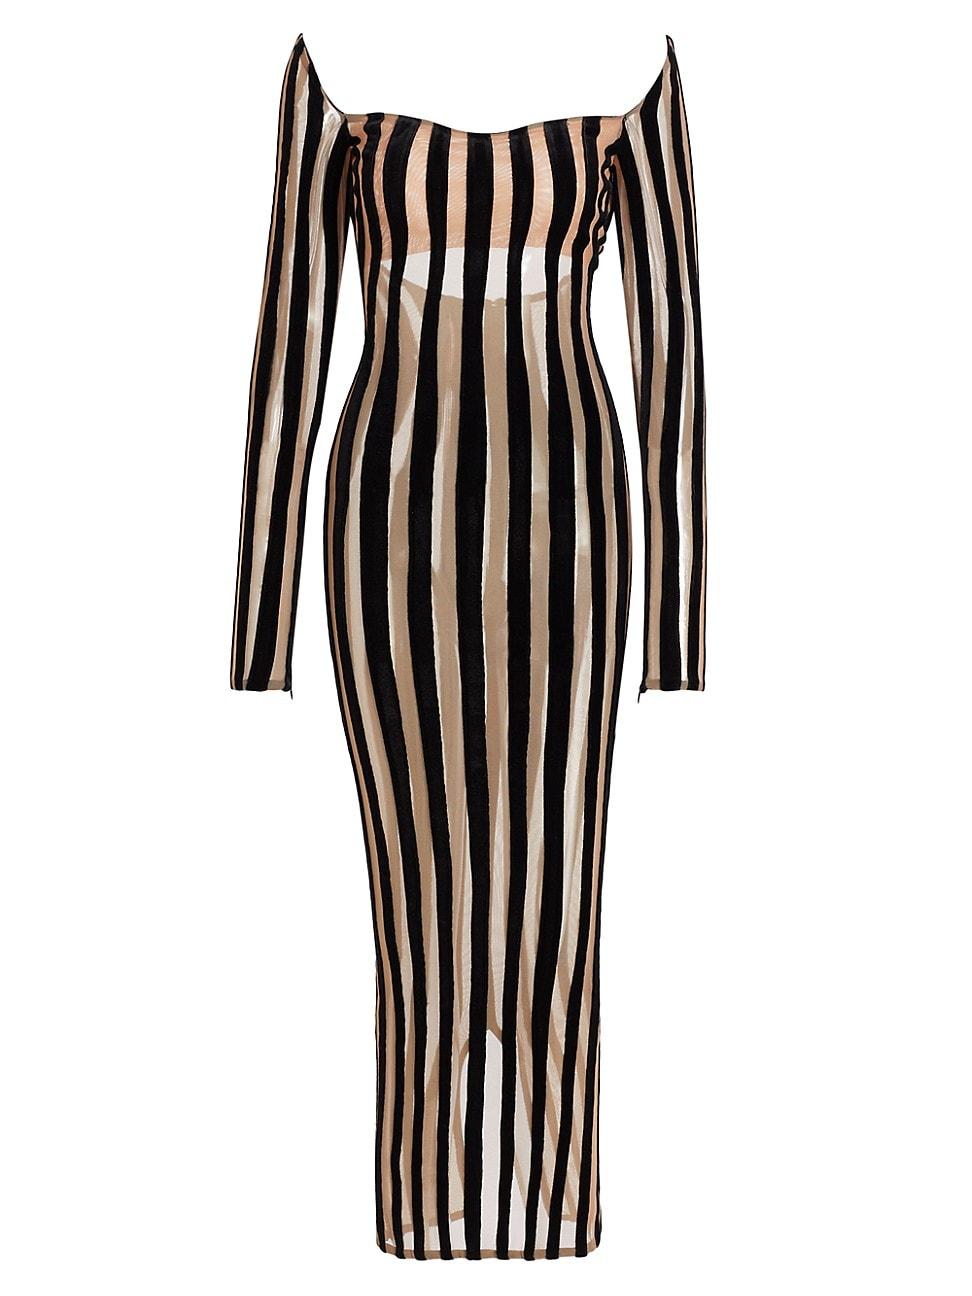 LAQUAN SMITH Striped Sheer Body-con Gown in Black | Lyst